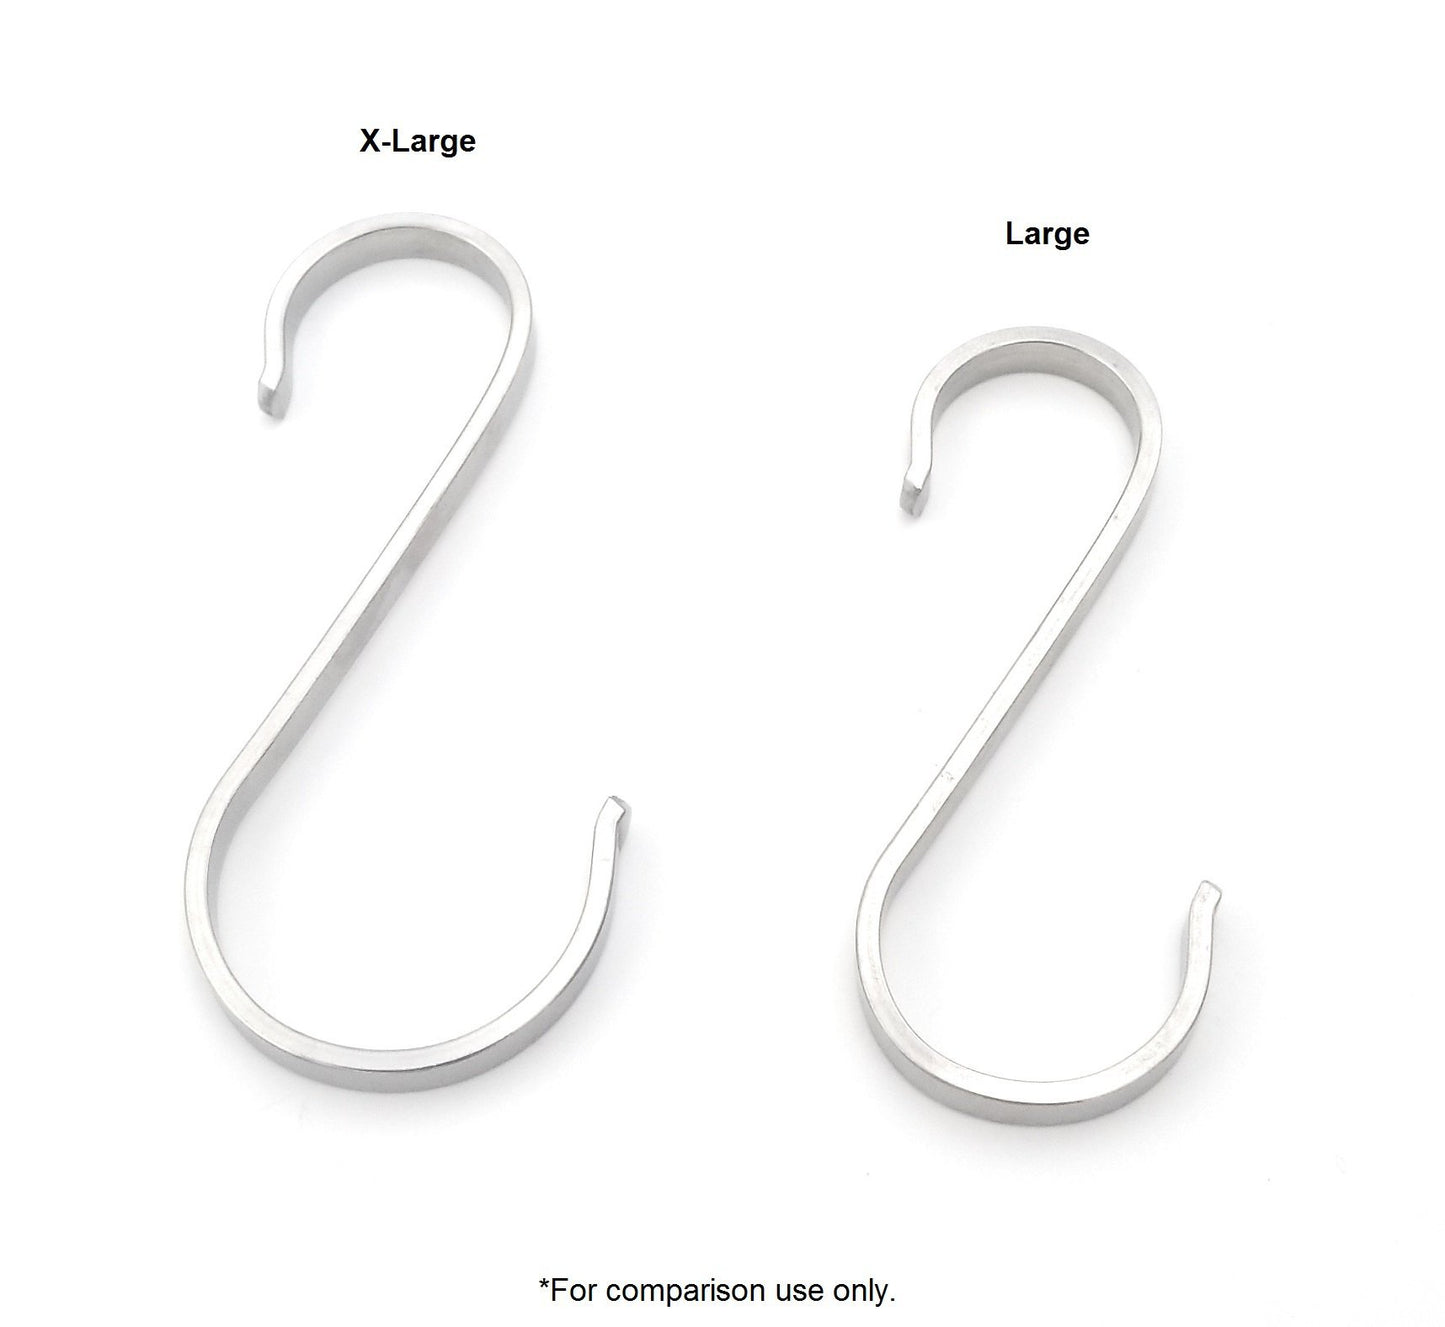 eeZe Rack ST-FSH-02 304 Stainless Steel All-Purpose Flat-S Utility Hook (X-Large, 15-pack)